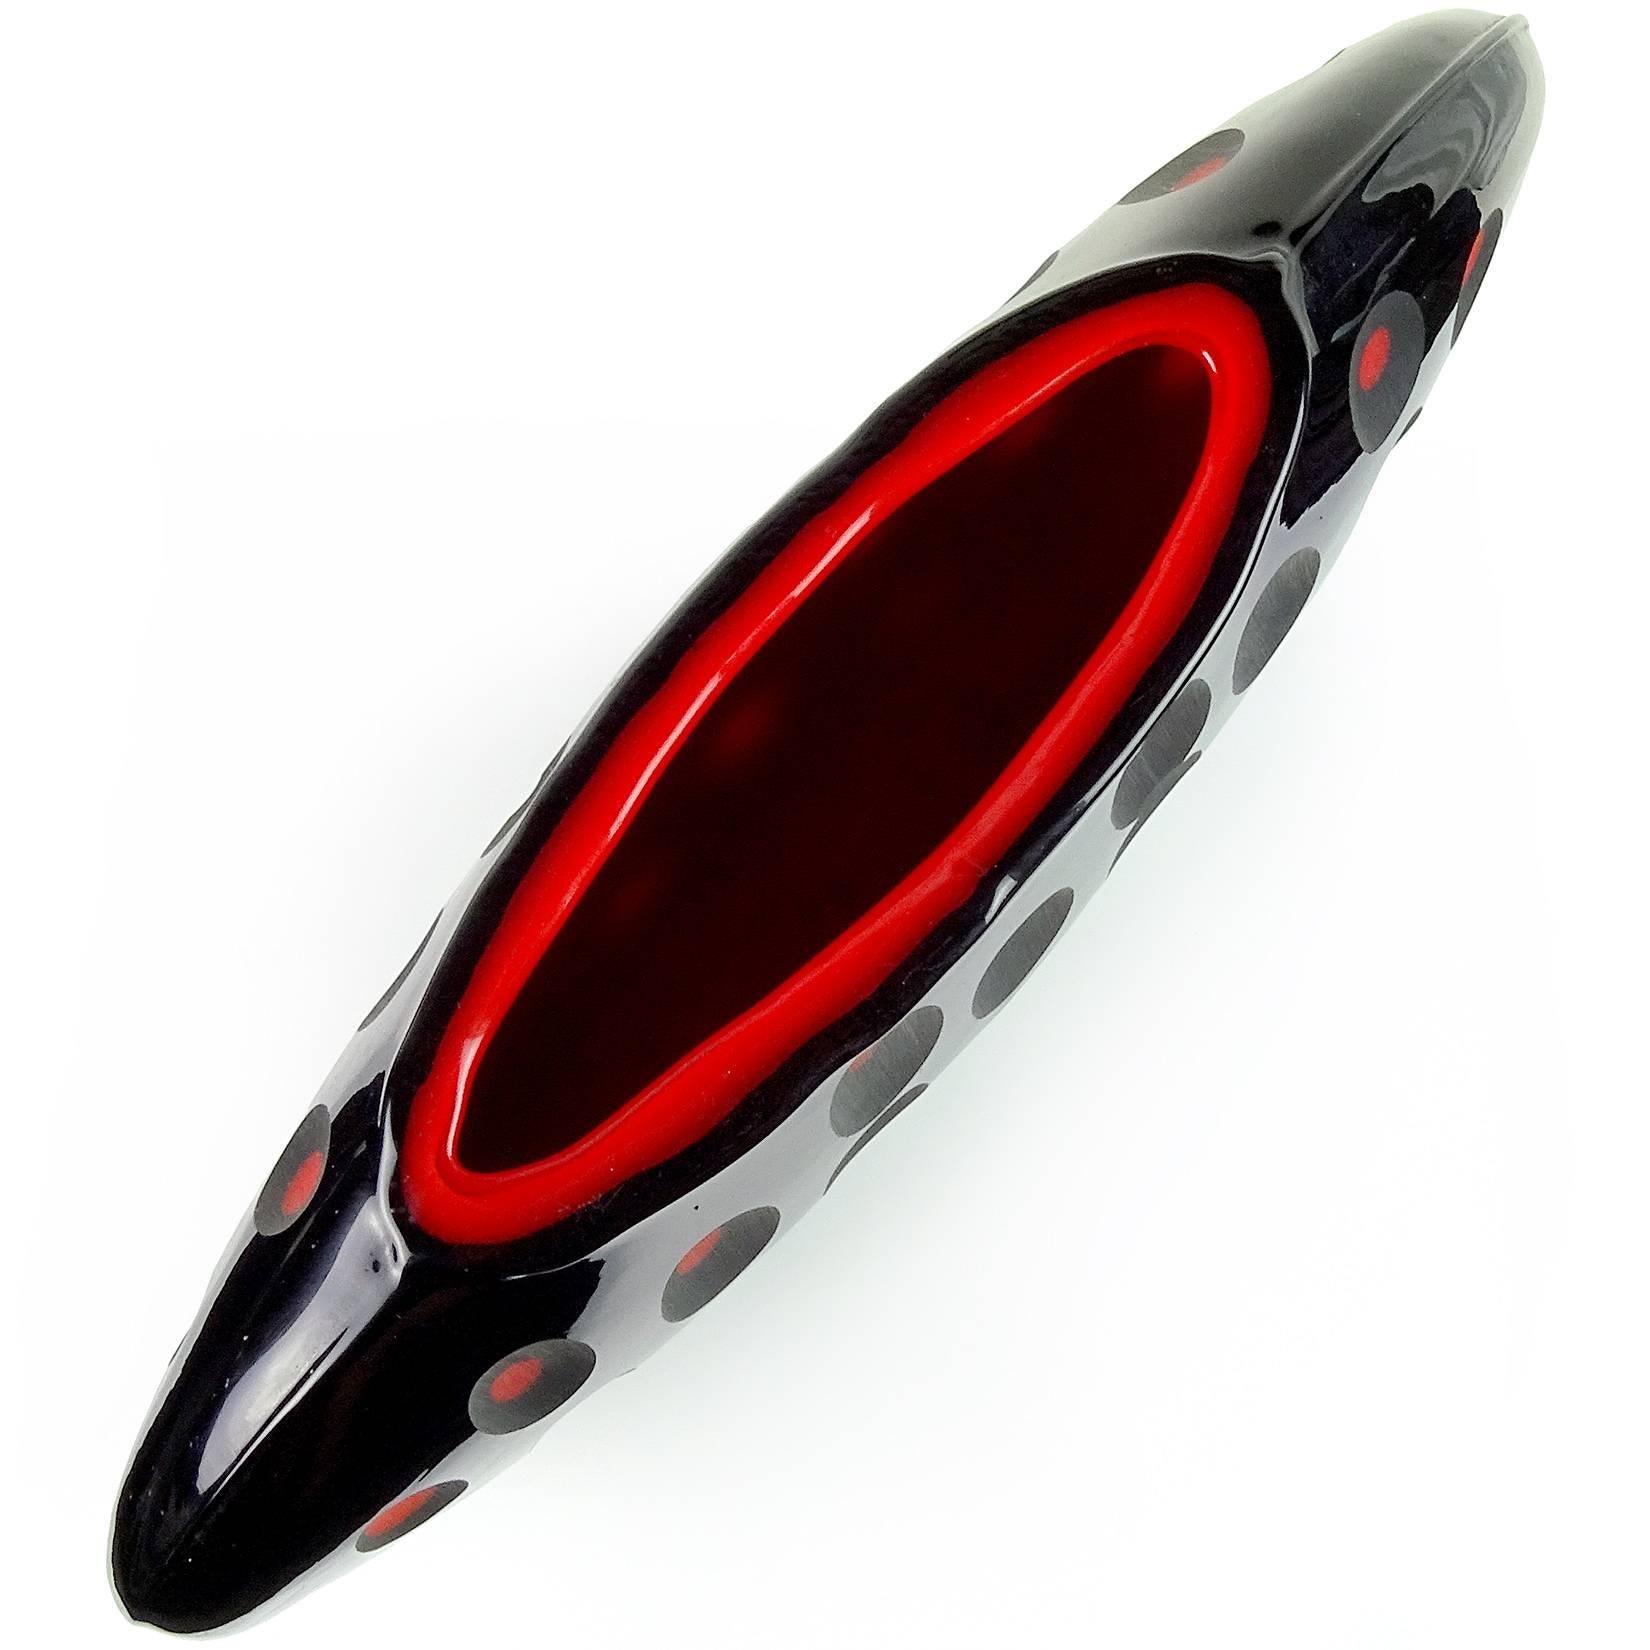 Large modern Murano handblown black over red core Italian art glass sculptural flower vase with carved surface. Created in the manner of the Venini Company. The piece has a flat shape, with carved ovals on both sides, showing the red inside layer.